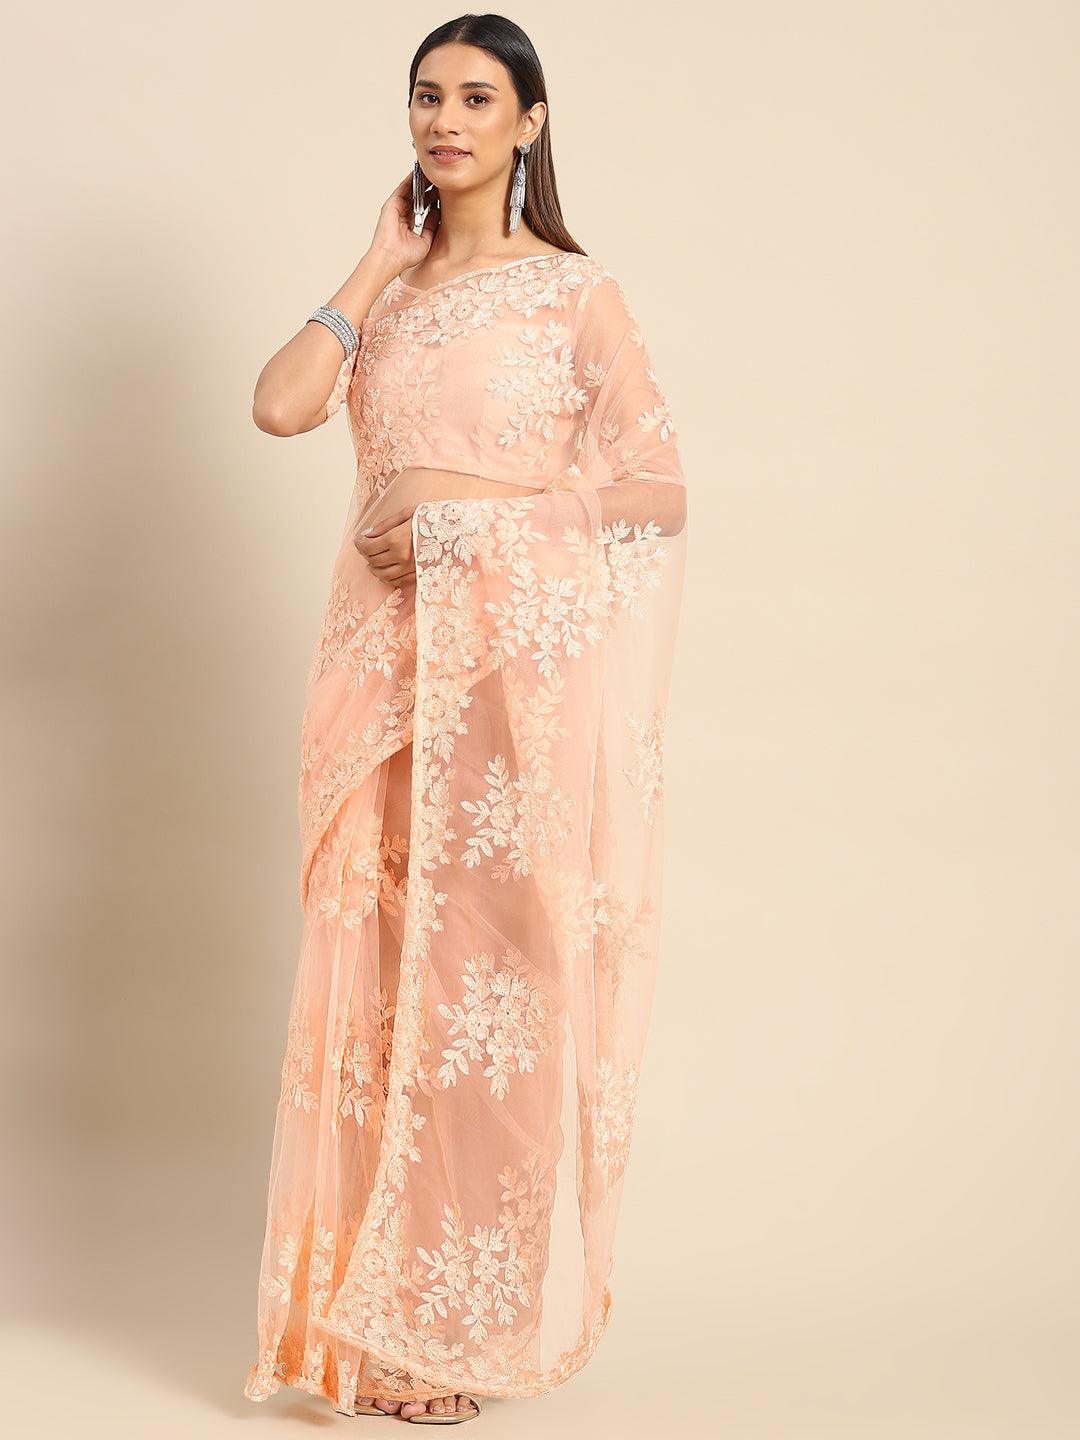 Gorgeous Peach Floral Embroidered Net Saree With Blouse - Indiakreations